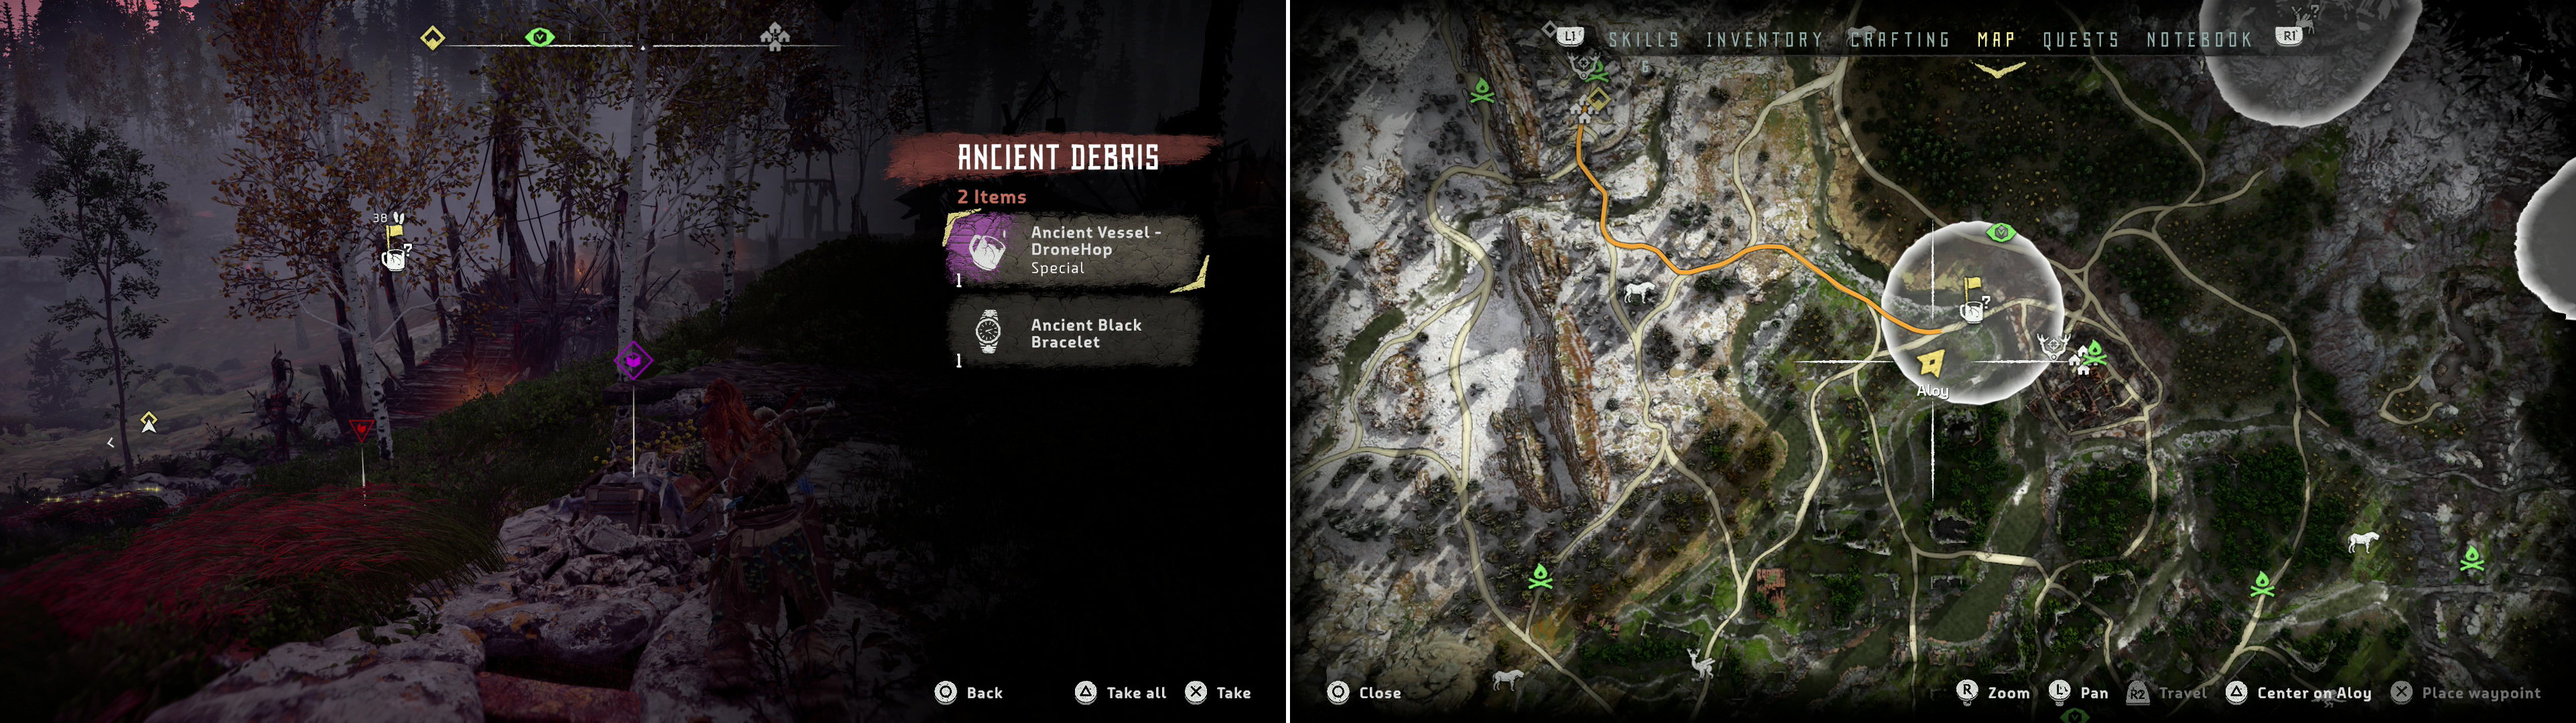 Search a pile of Ancient Debris to obtain the Ancient Vessel - DroneHop (left) at the location indicated on the map (right).